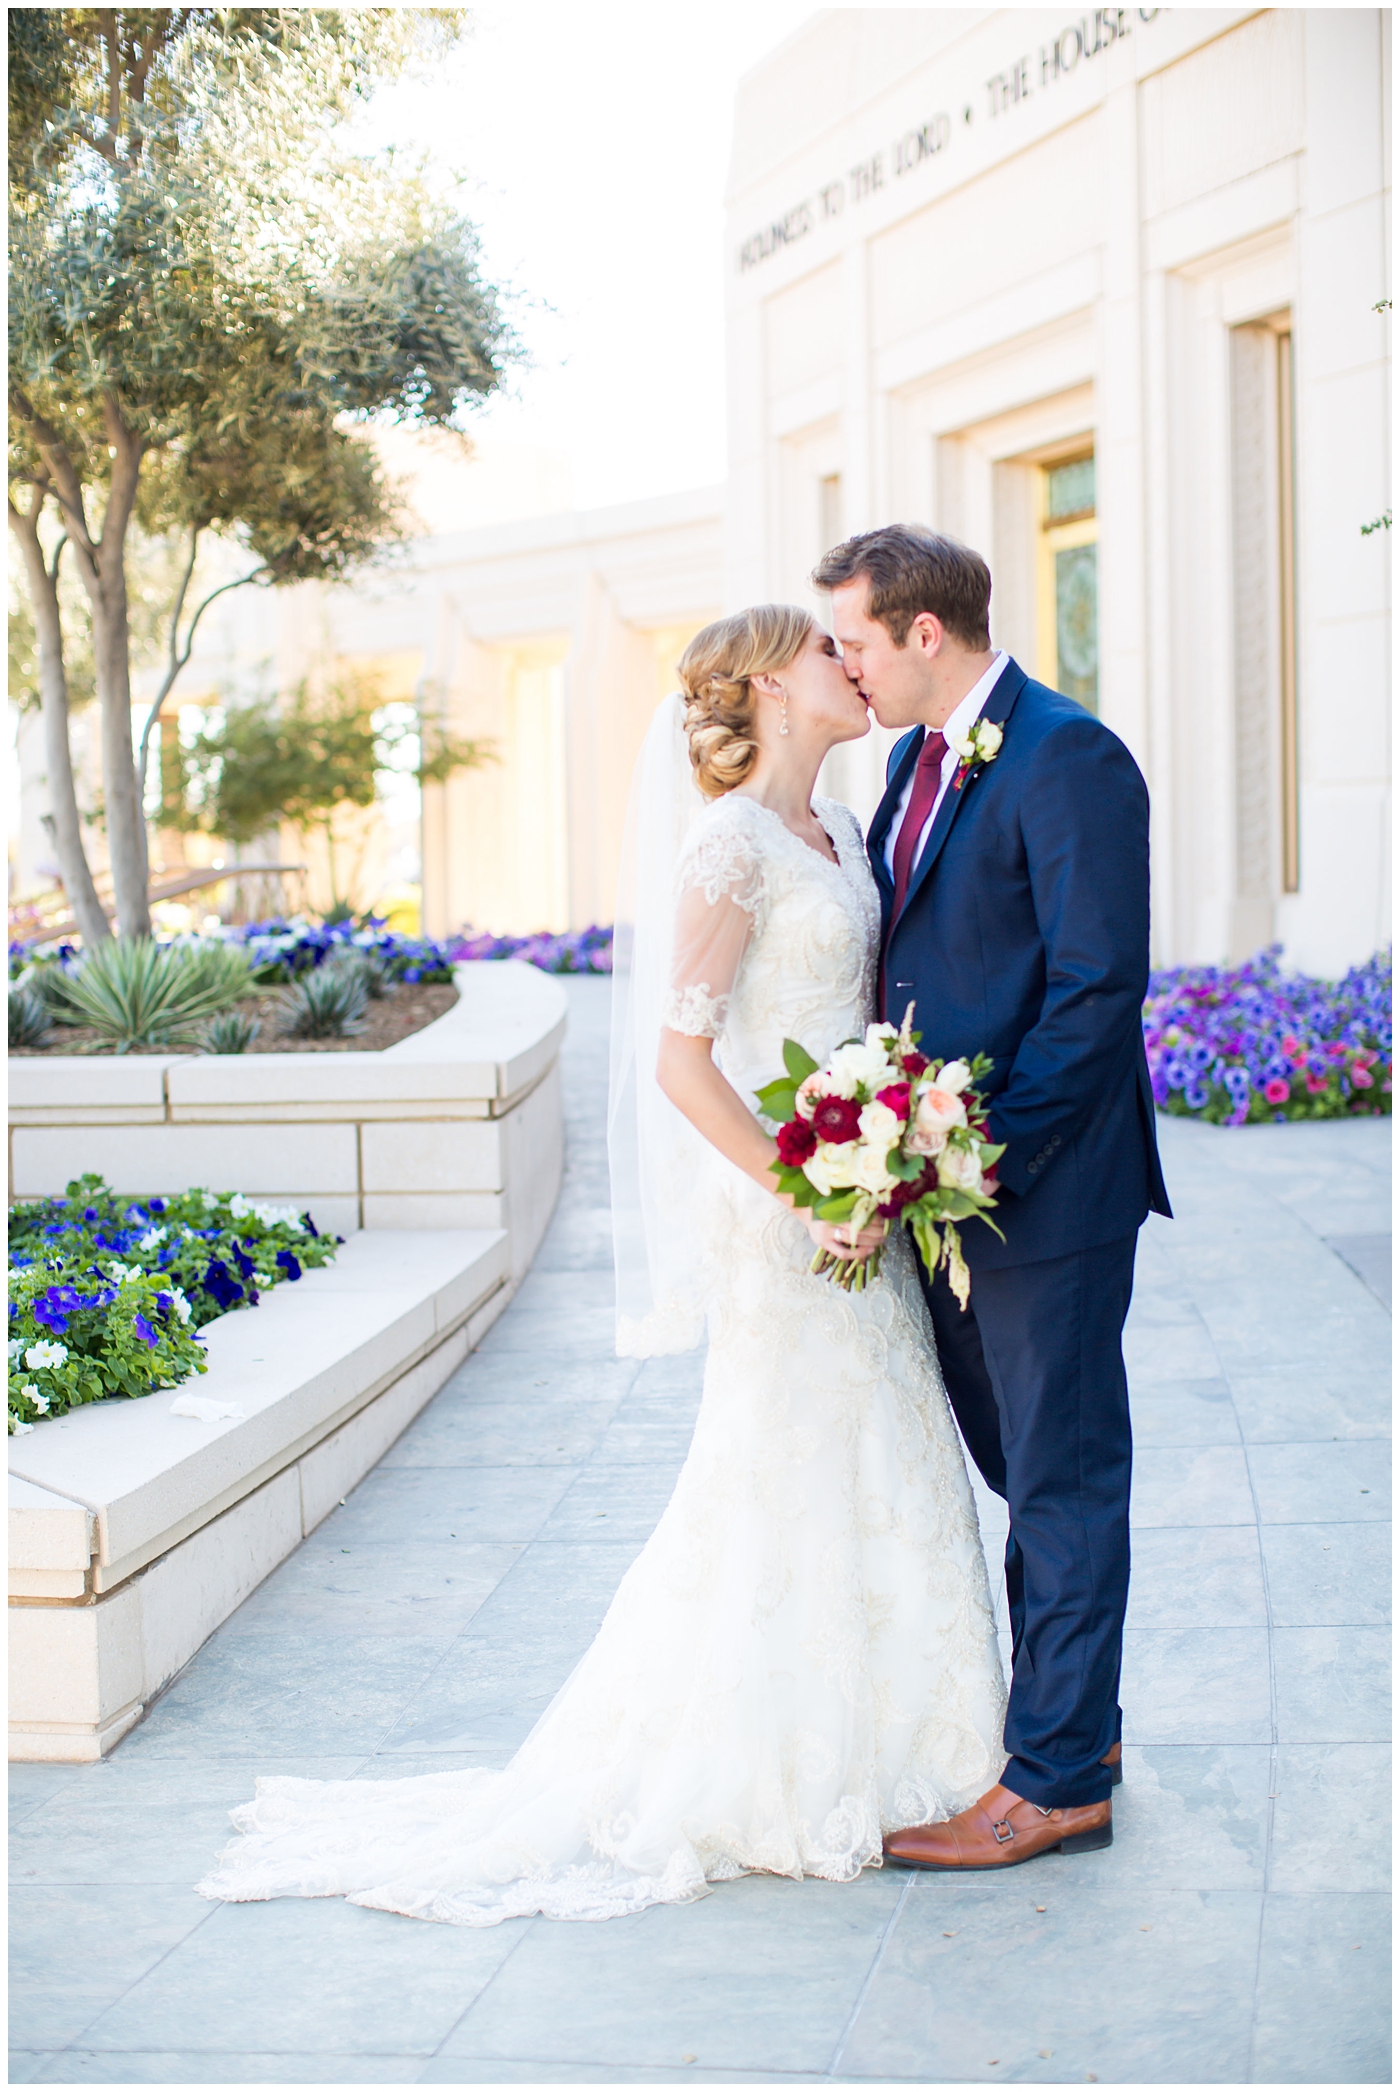 bride in sleeved lace dress with burgundy, white, and green wedding bouquet and groom in navy suit with burgundy tie wedding day portrait at Gilbert LDS temple